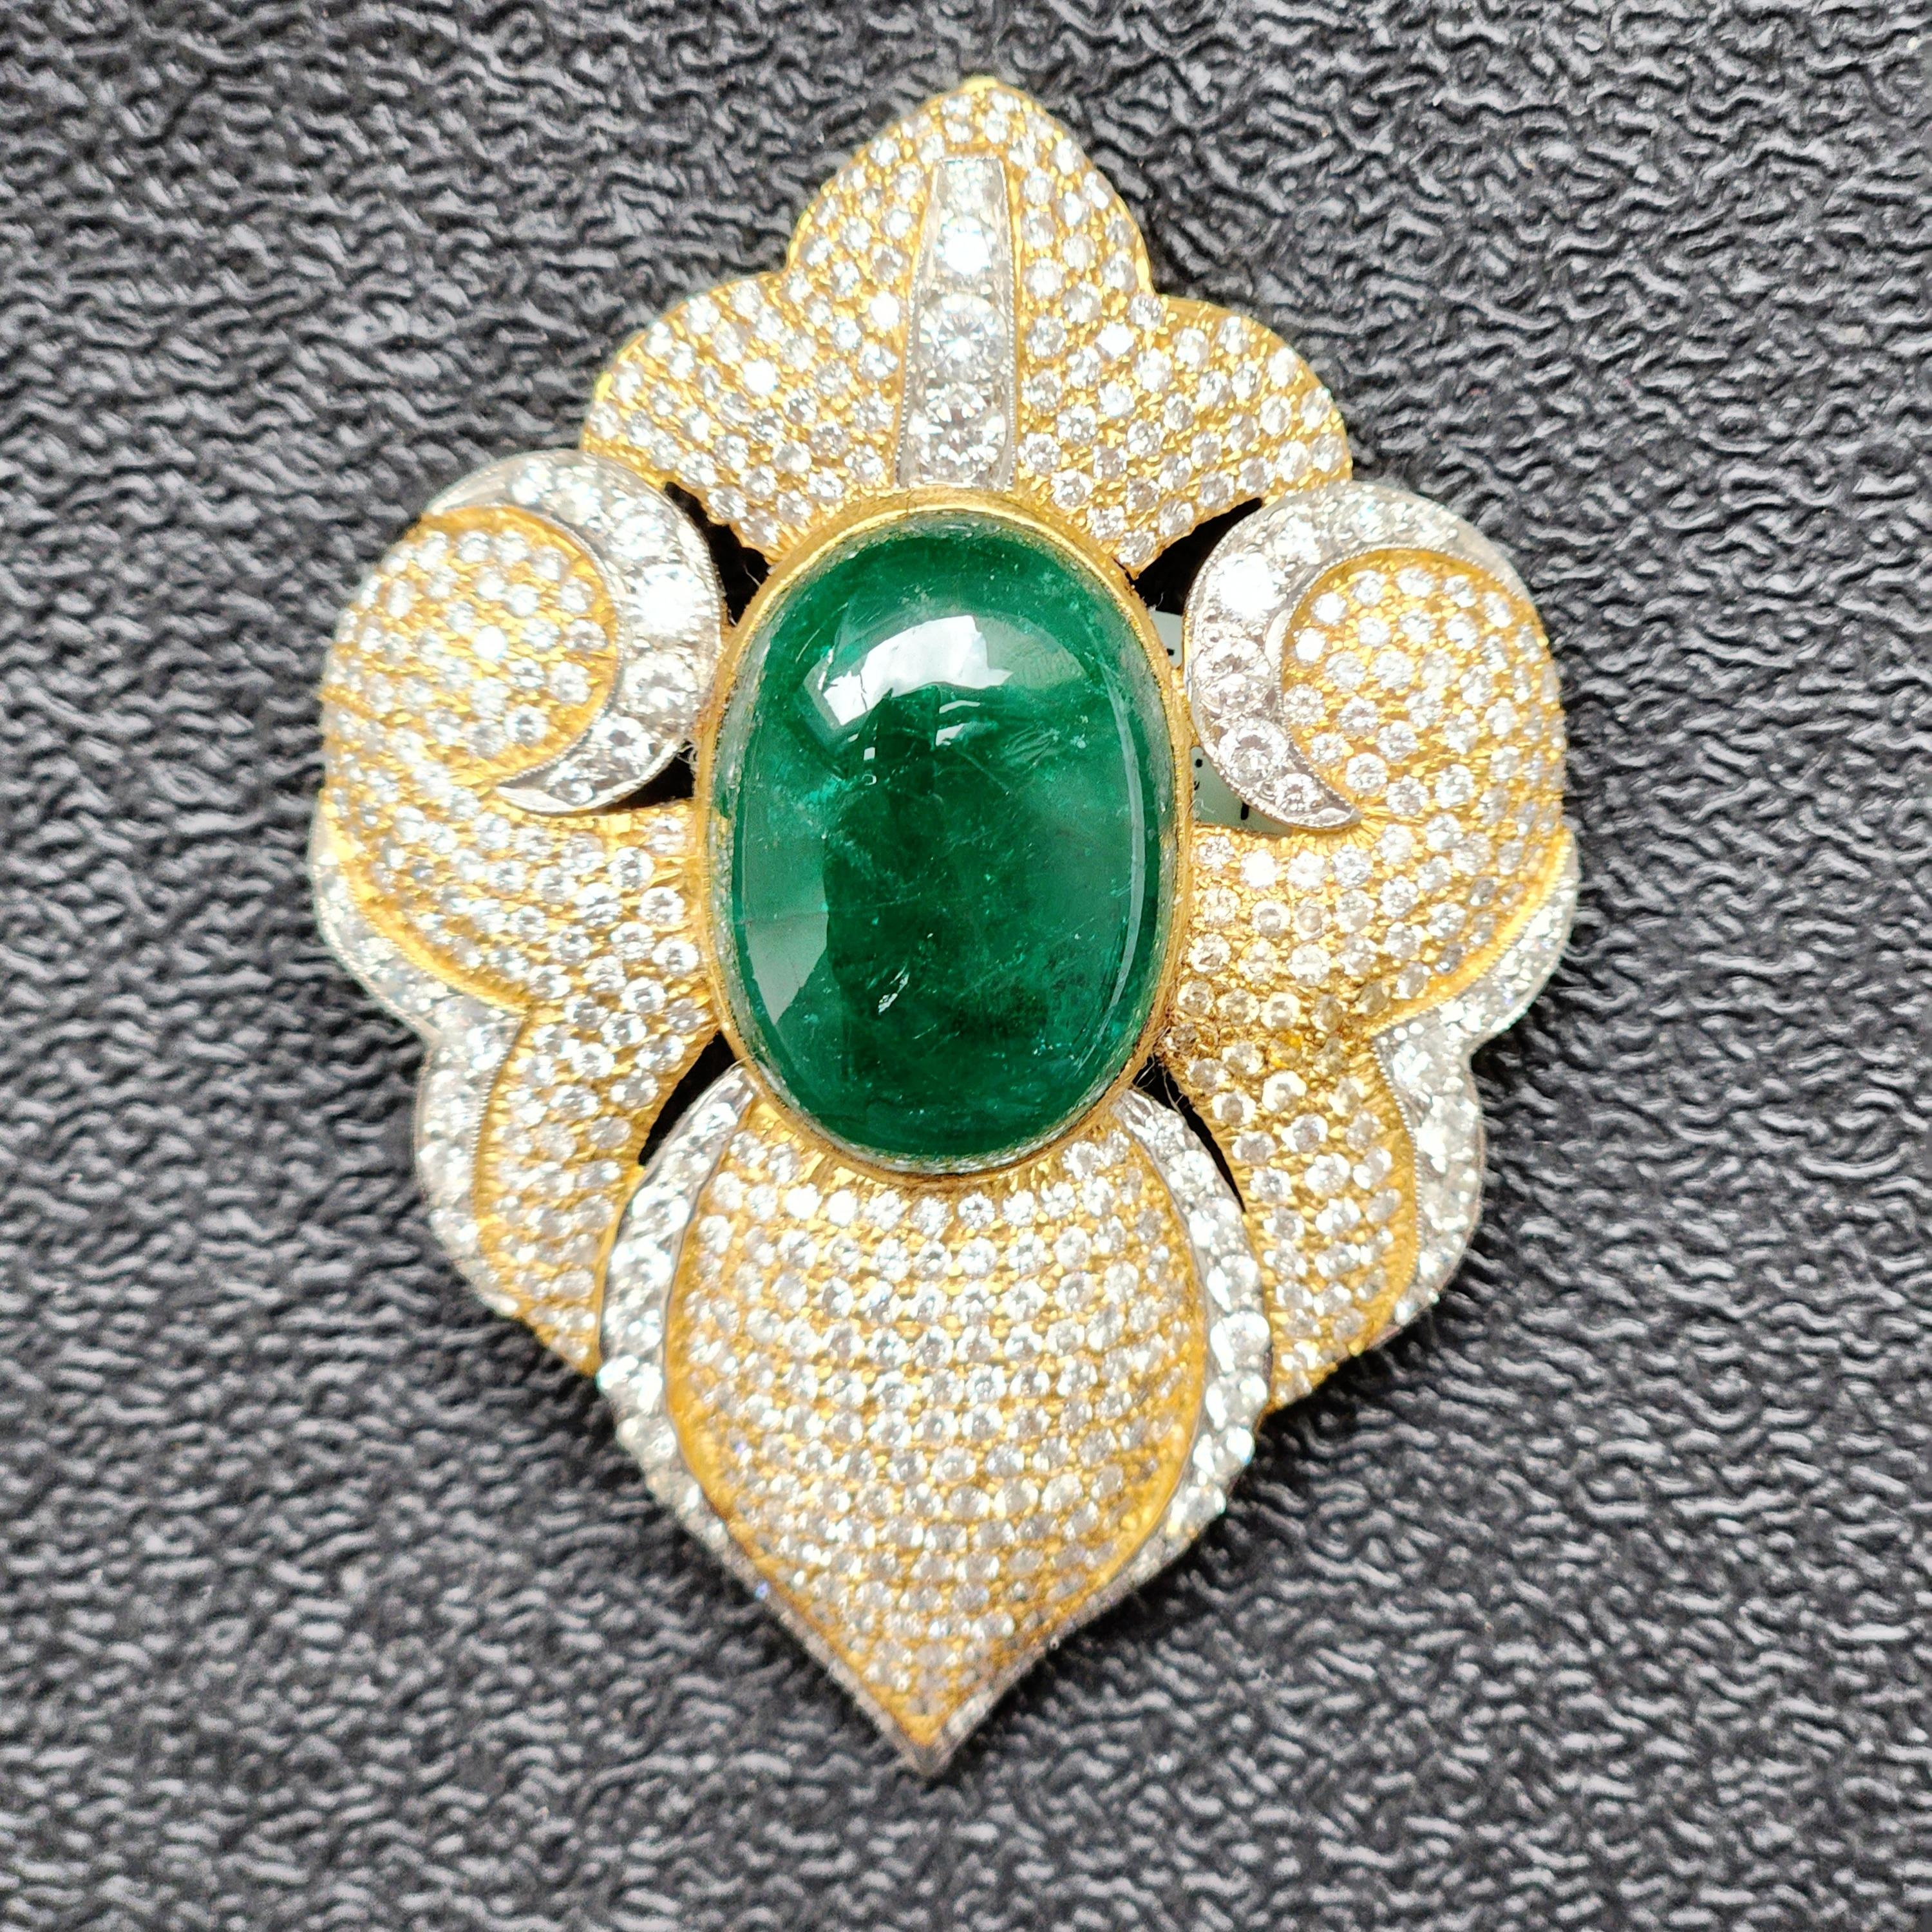 Introducing the Fancy Art Deco Pendant Brooch, a stunning and unique piece of jewelry that showcases exquisite craftsmanship and impeccable design. The centerpiece of this piece is a dazzling green oval cabochon emerald (weighing 19.46 cts) that